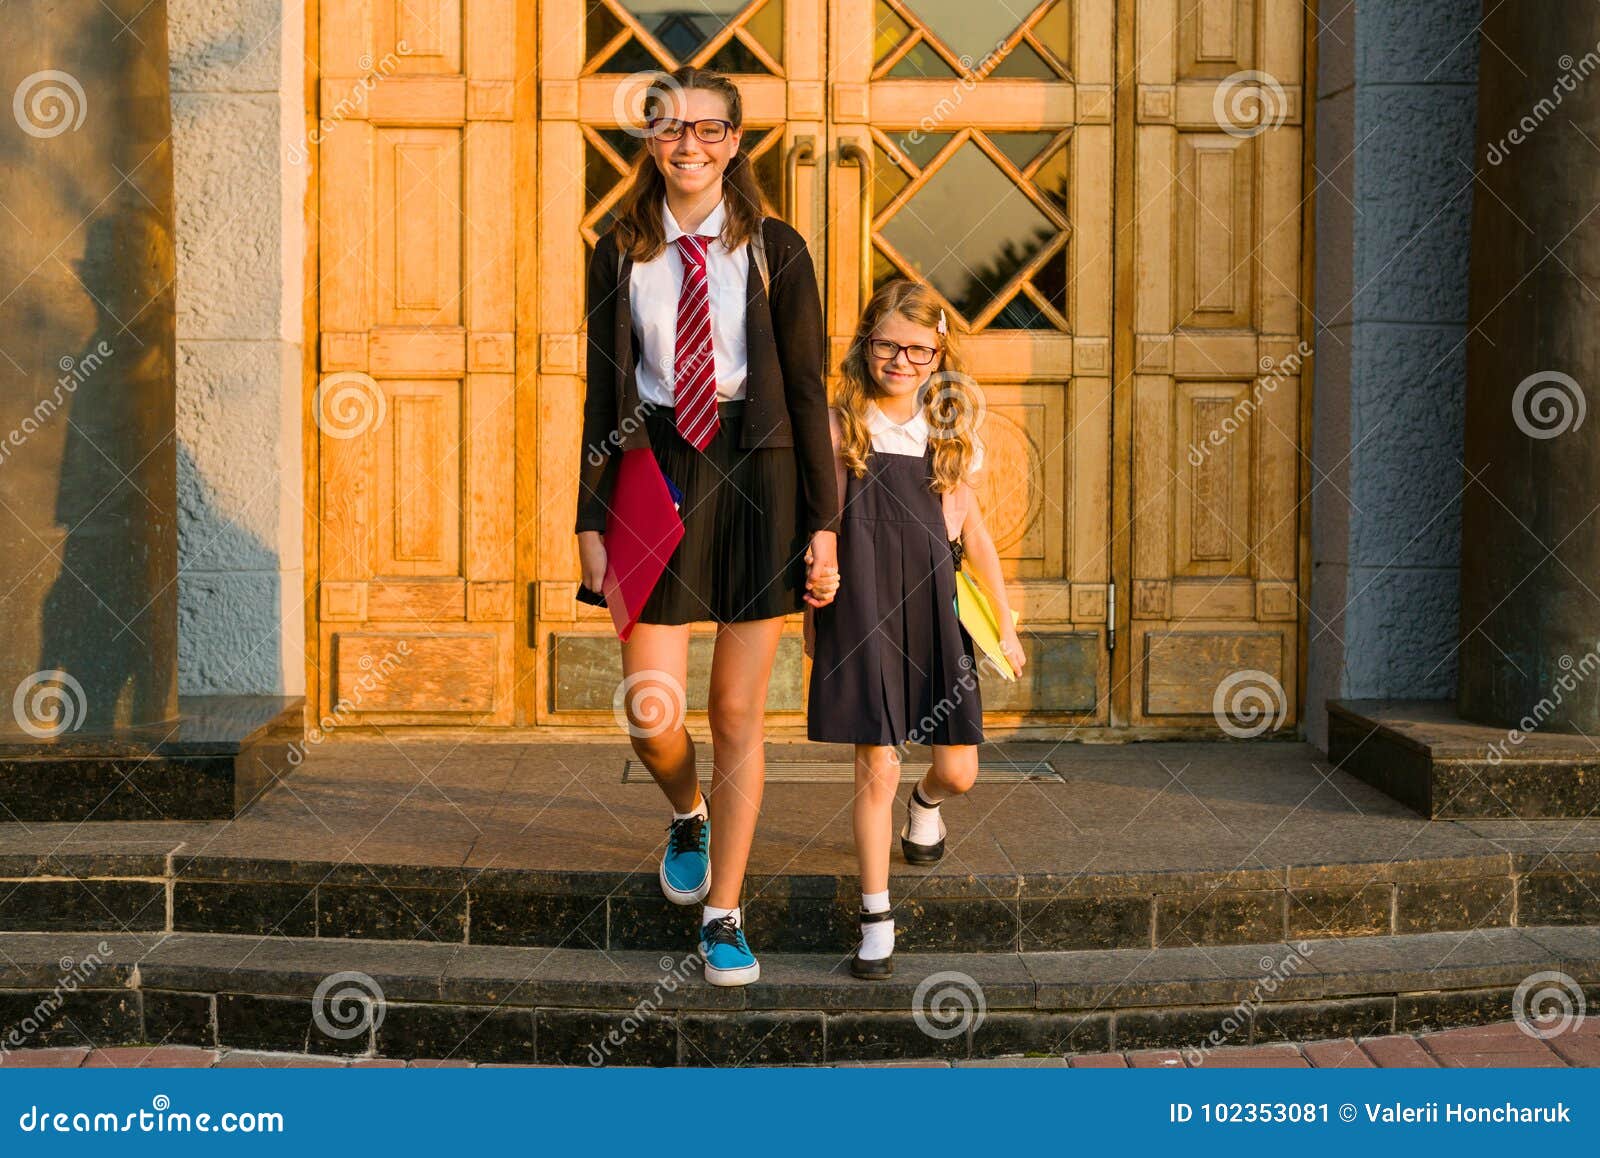 Outdoor Portrait Of Two Girls Stock Image Image Of Beautiful